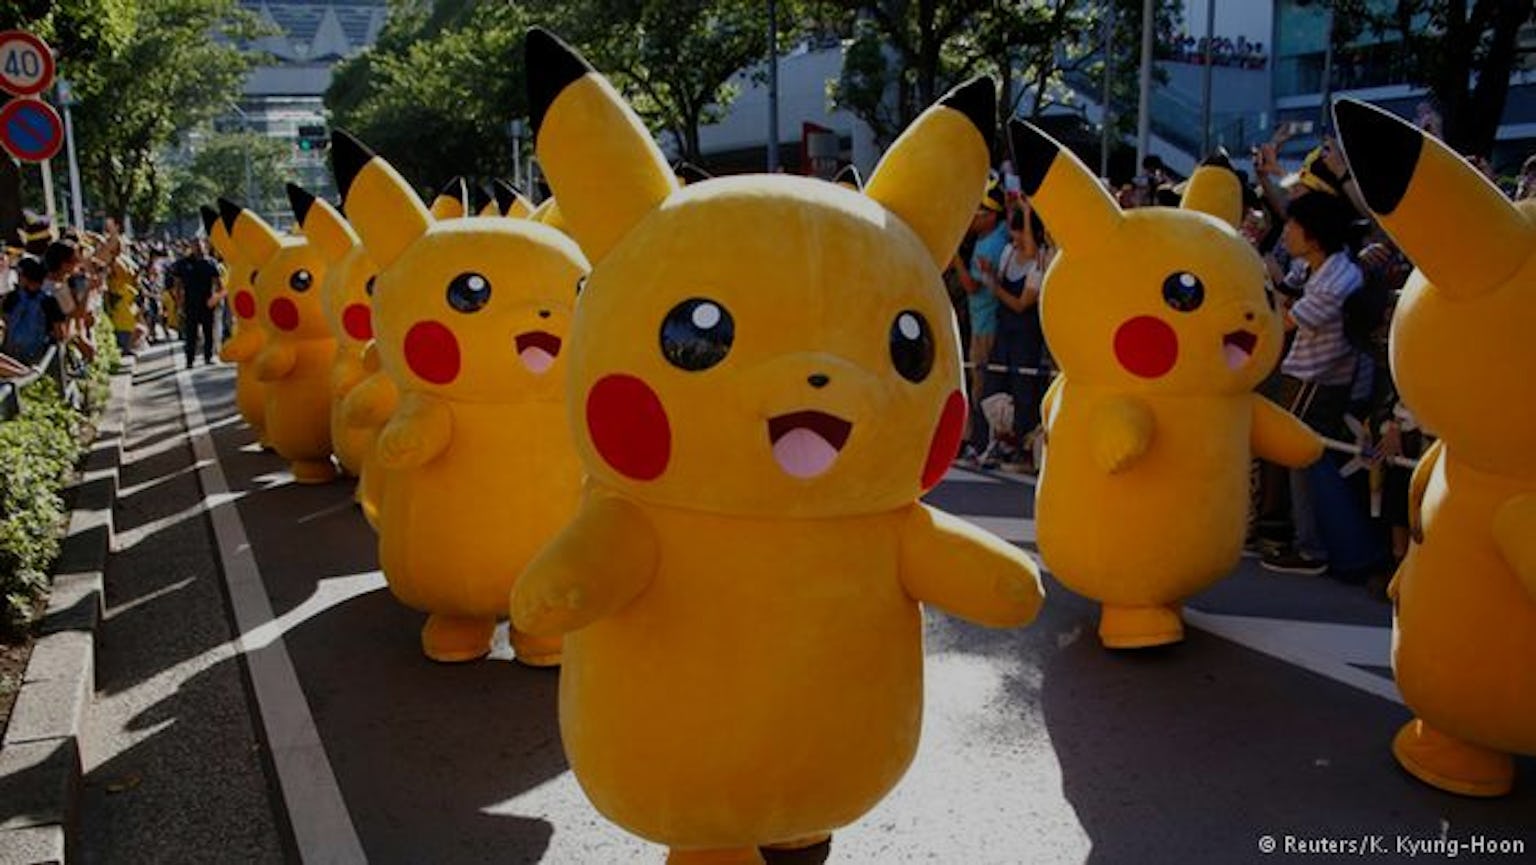 Here Are Images From This Year's Pikachu Parade in Japan